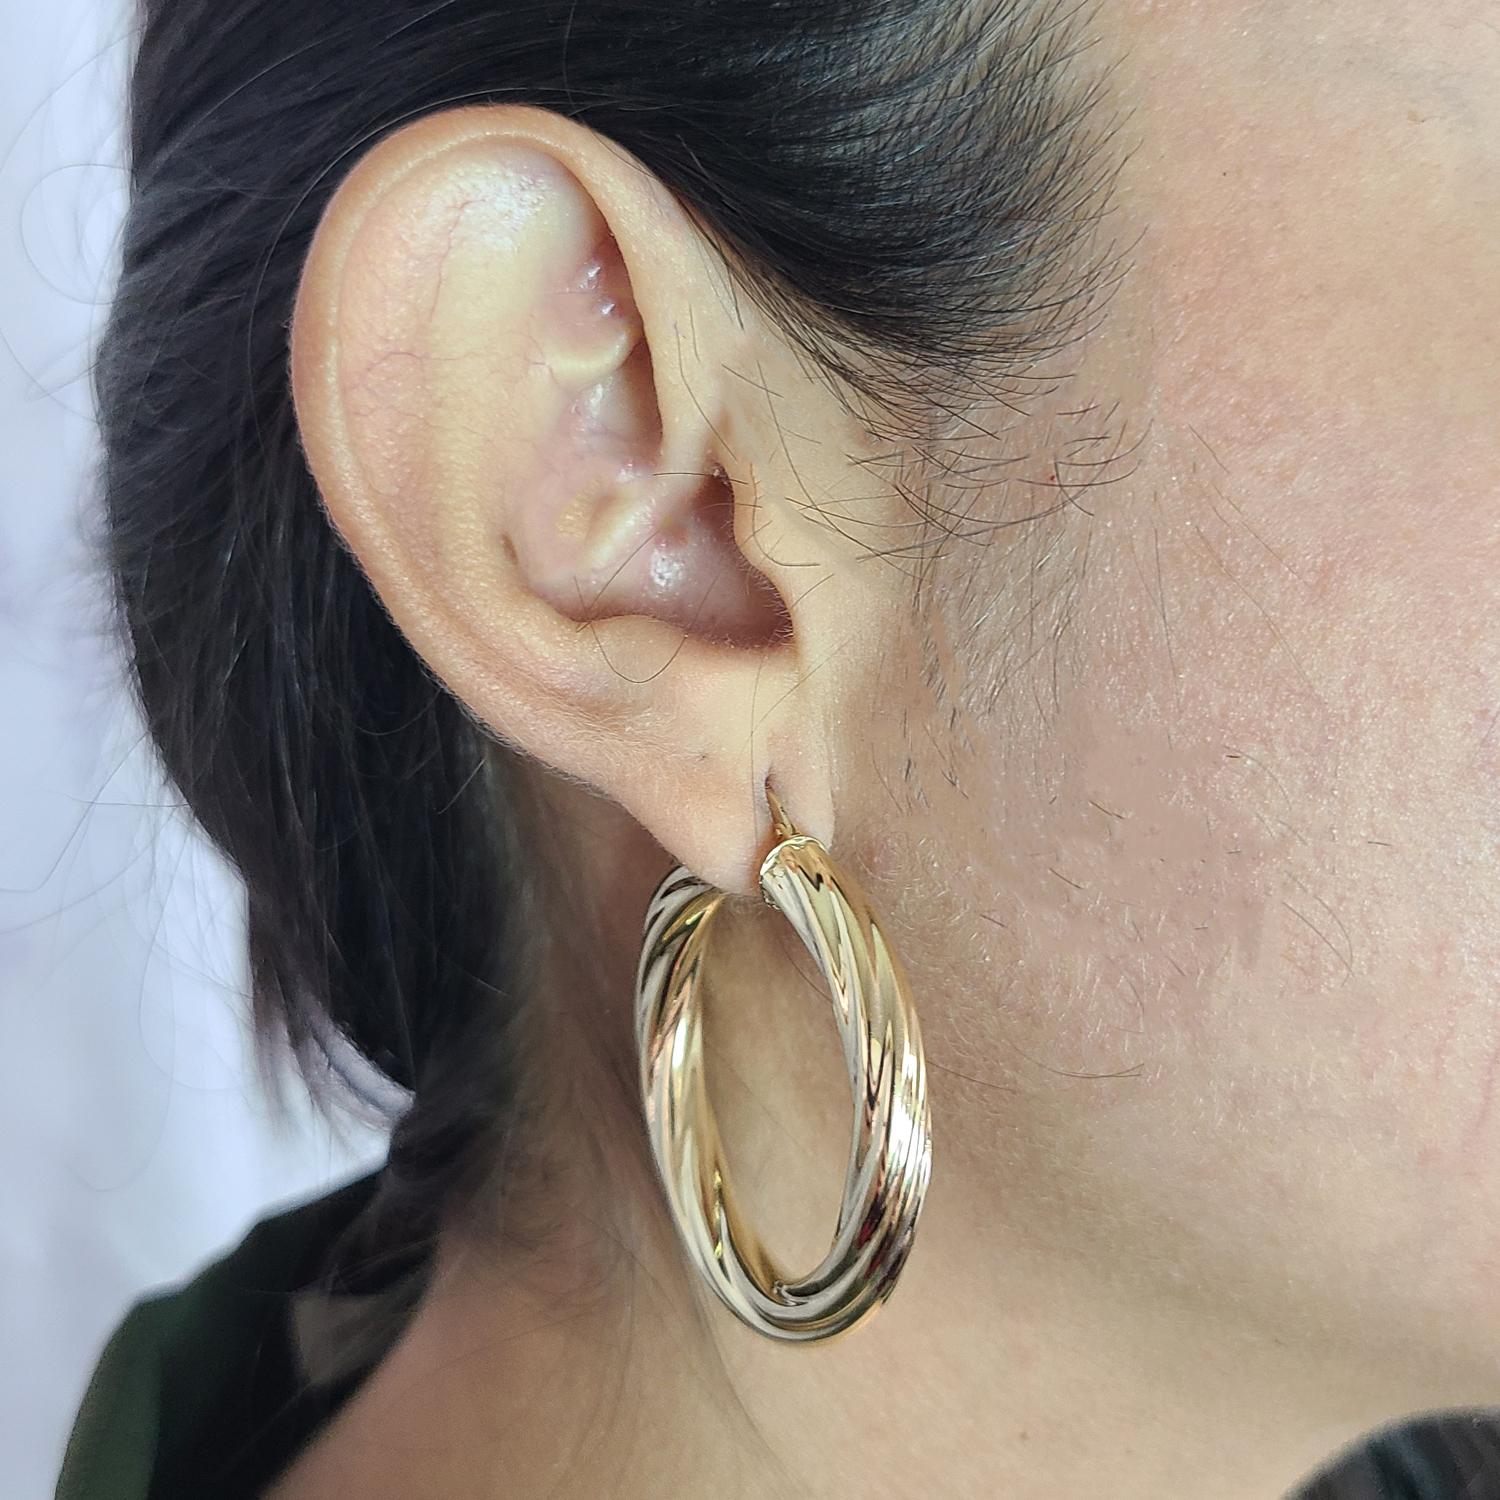 14 Karat Yellow Gold 6mm Wide Twisted Hoop Earrings with 1.75 Inch Diameter. Pierced Hinged Post with U Clip Closure. Finished Weight is 7.6 Grams.